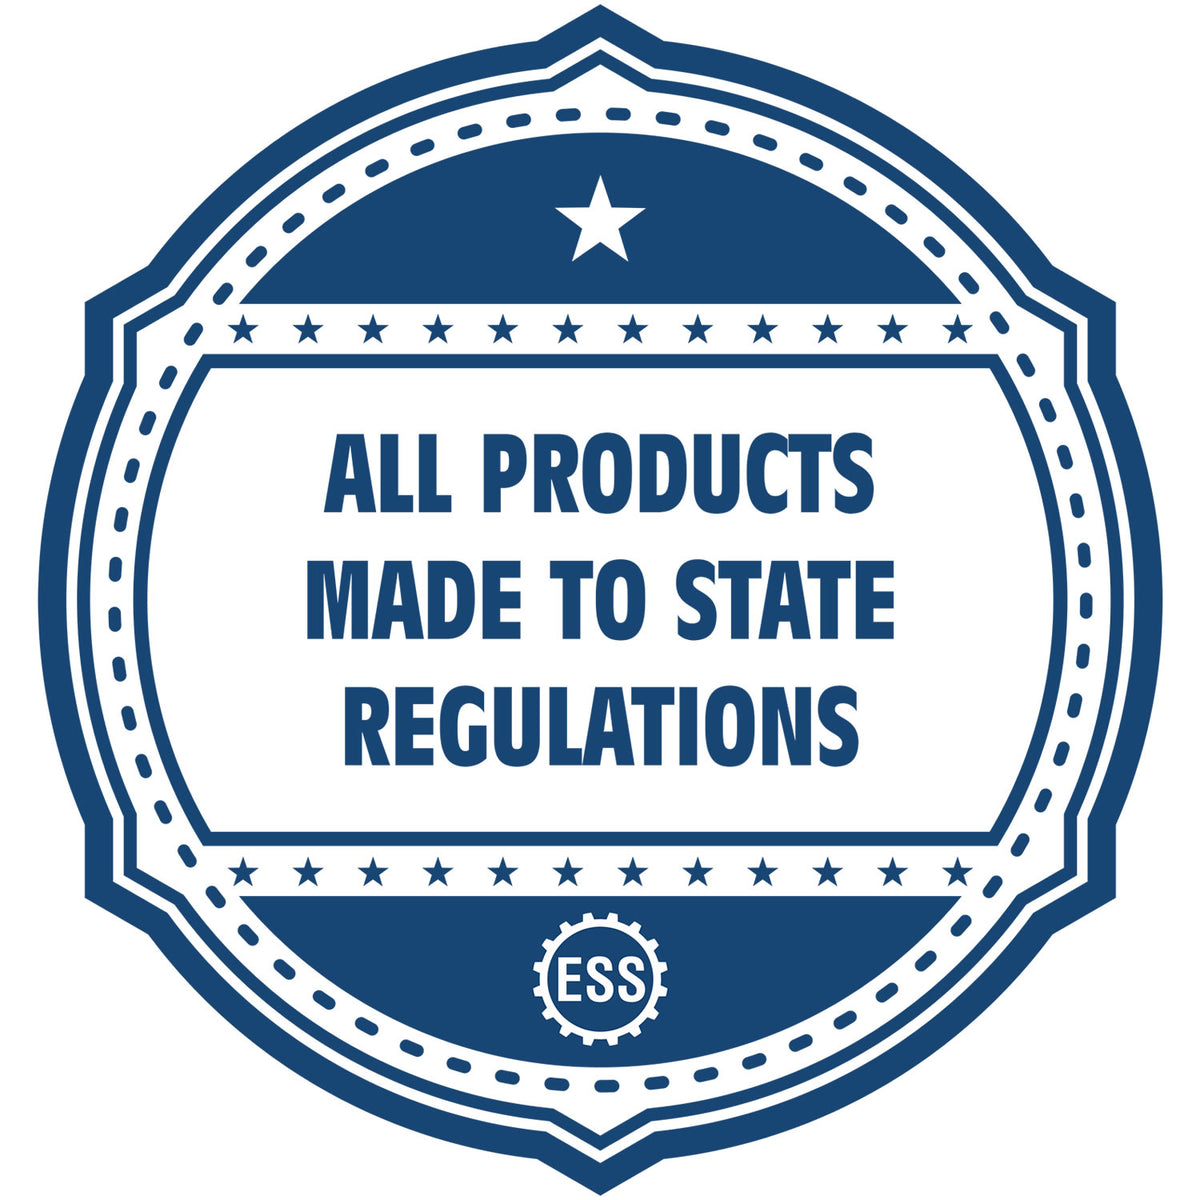 An icon or badge element for the State of Florida Long Reach Architectural Embossing Seal showing that this product is made in compliance with state regulations.